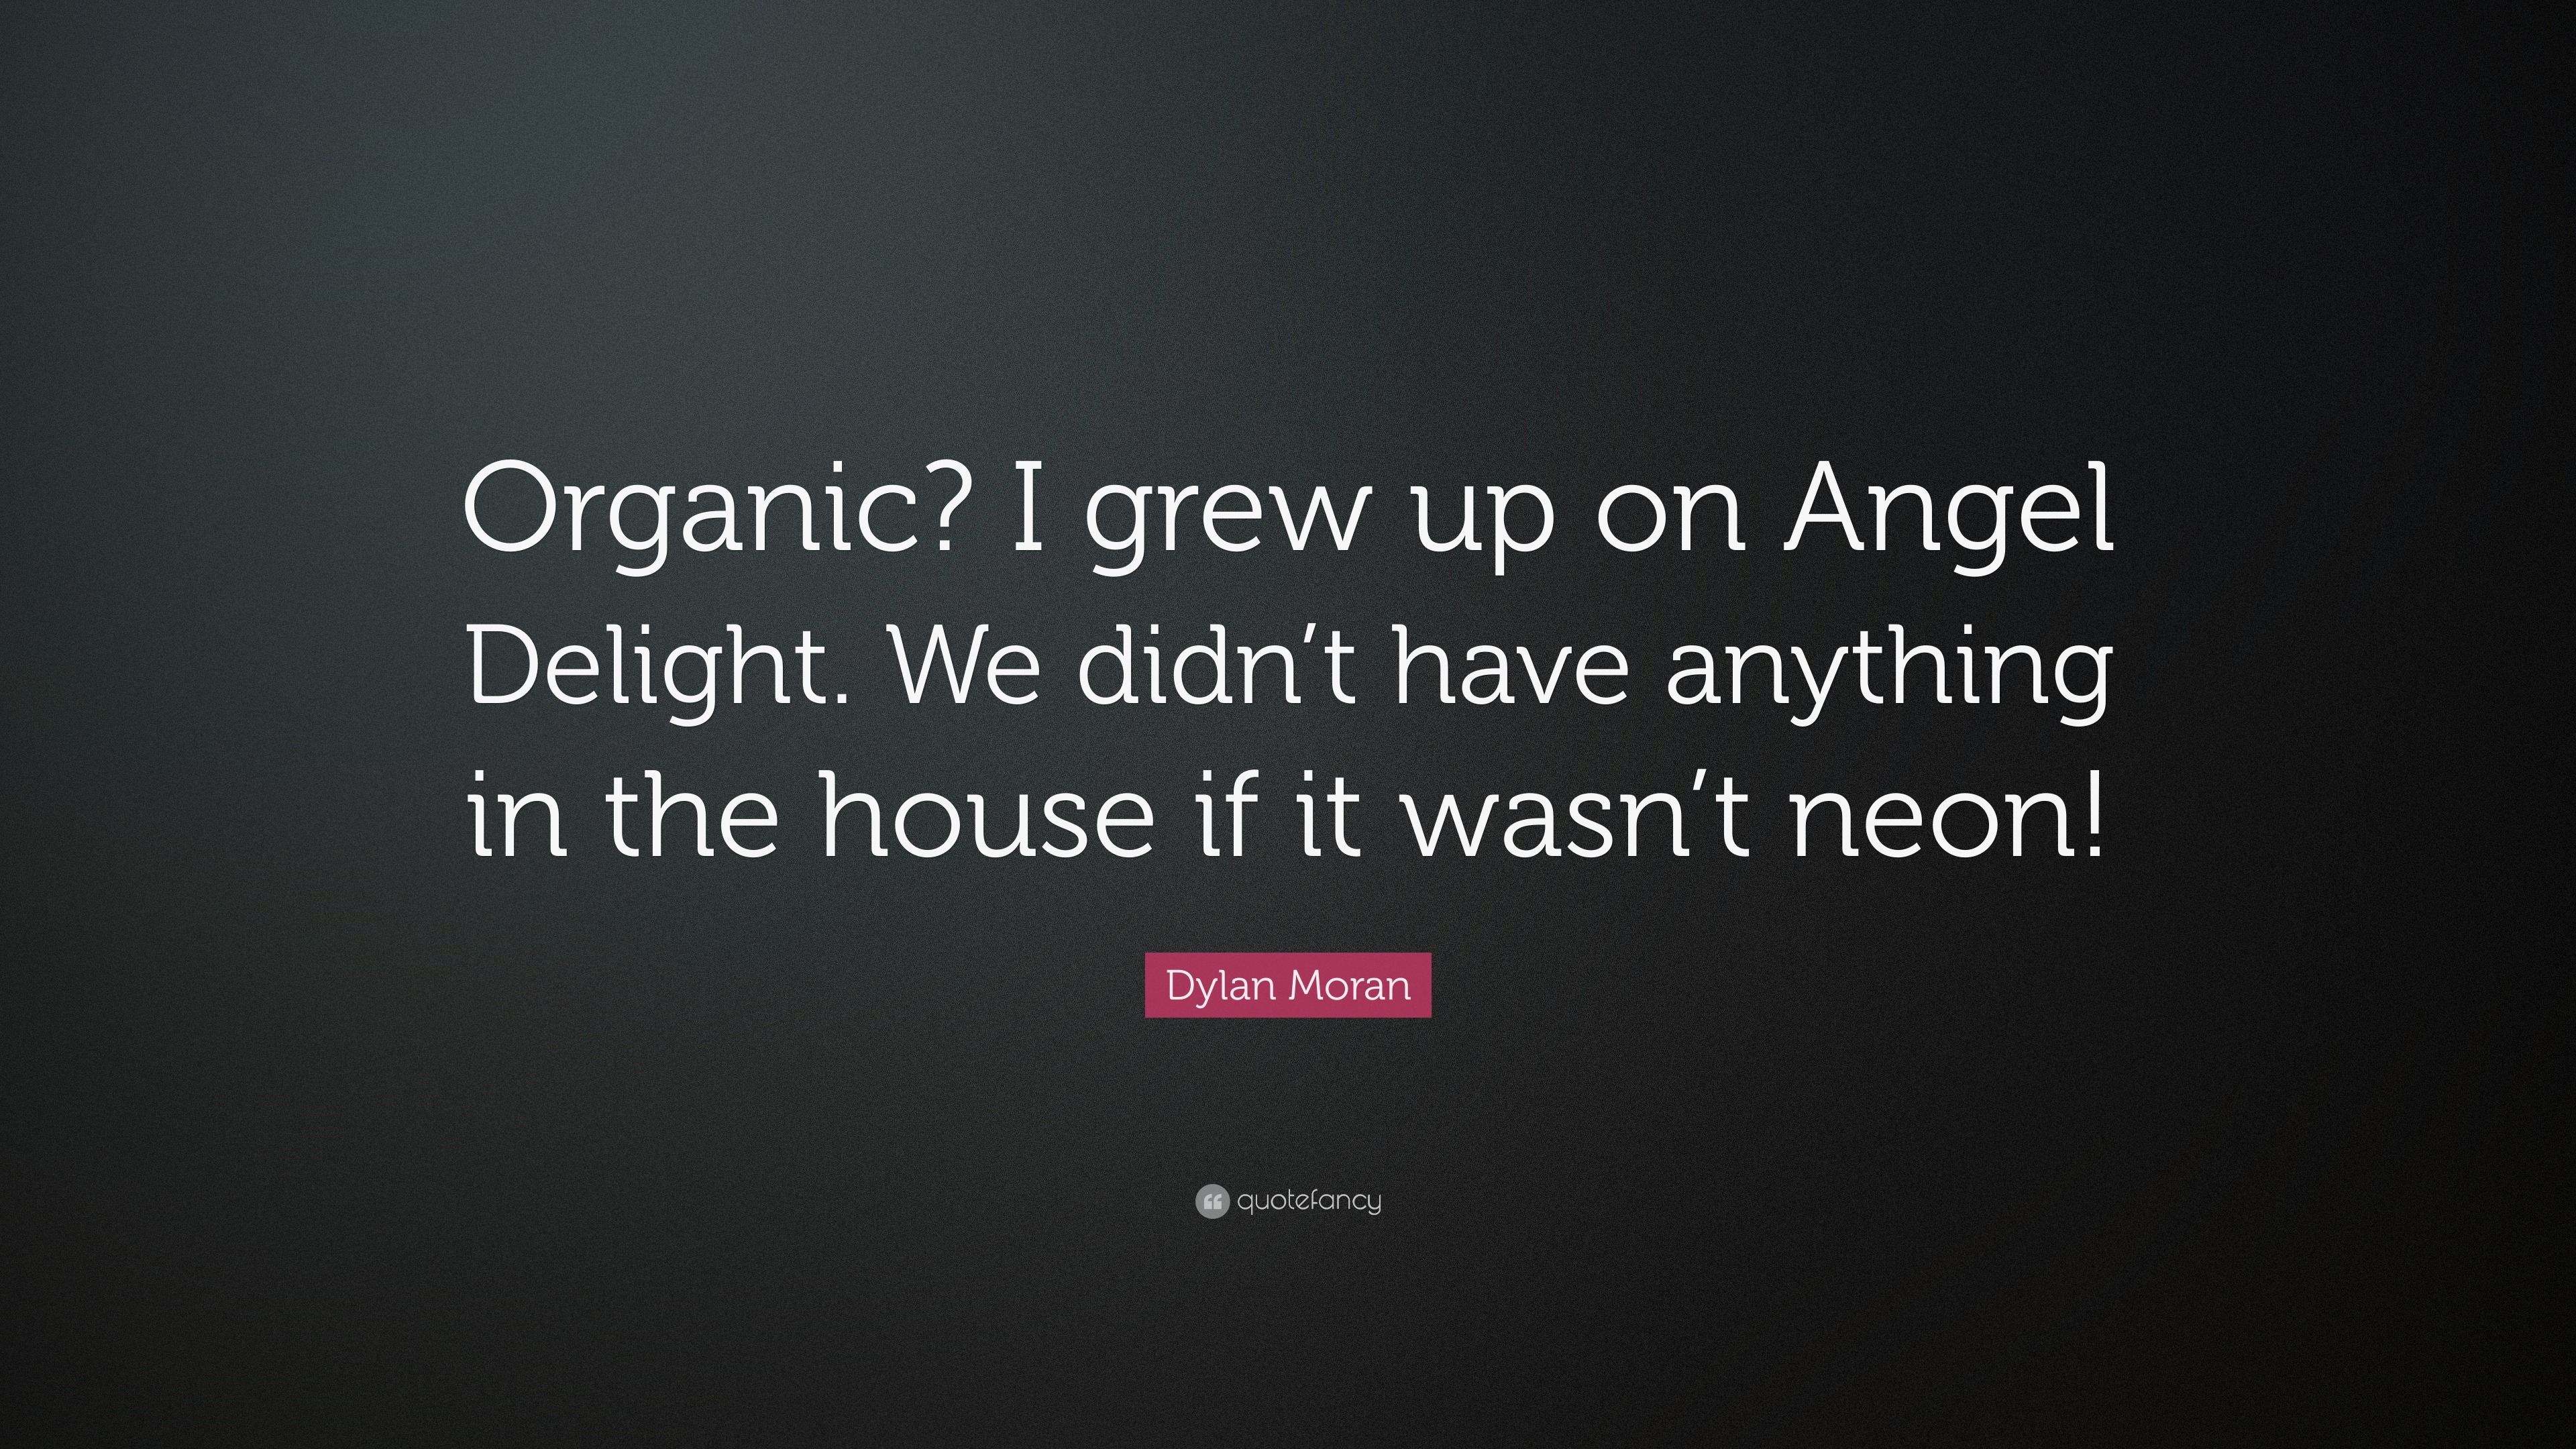 Dylan Moran Quote: “Organic? I grew up on Angel Delight. We didn’t have